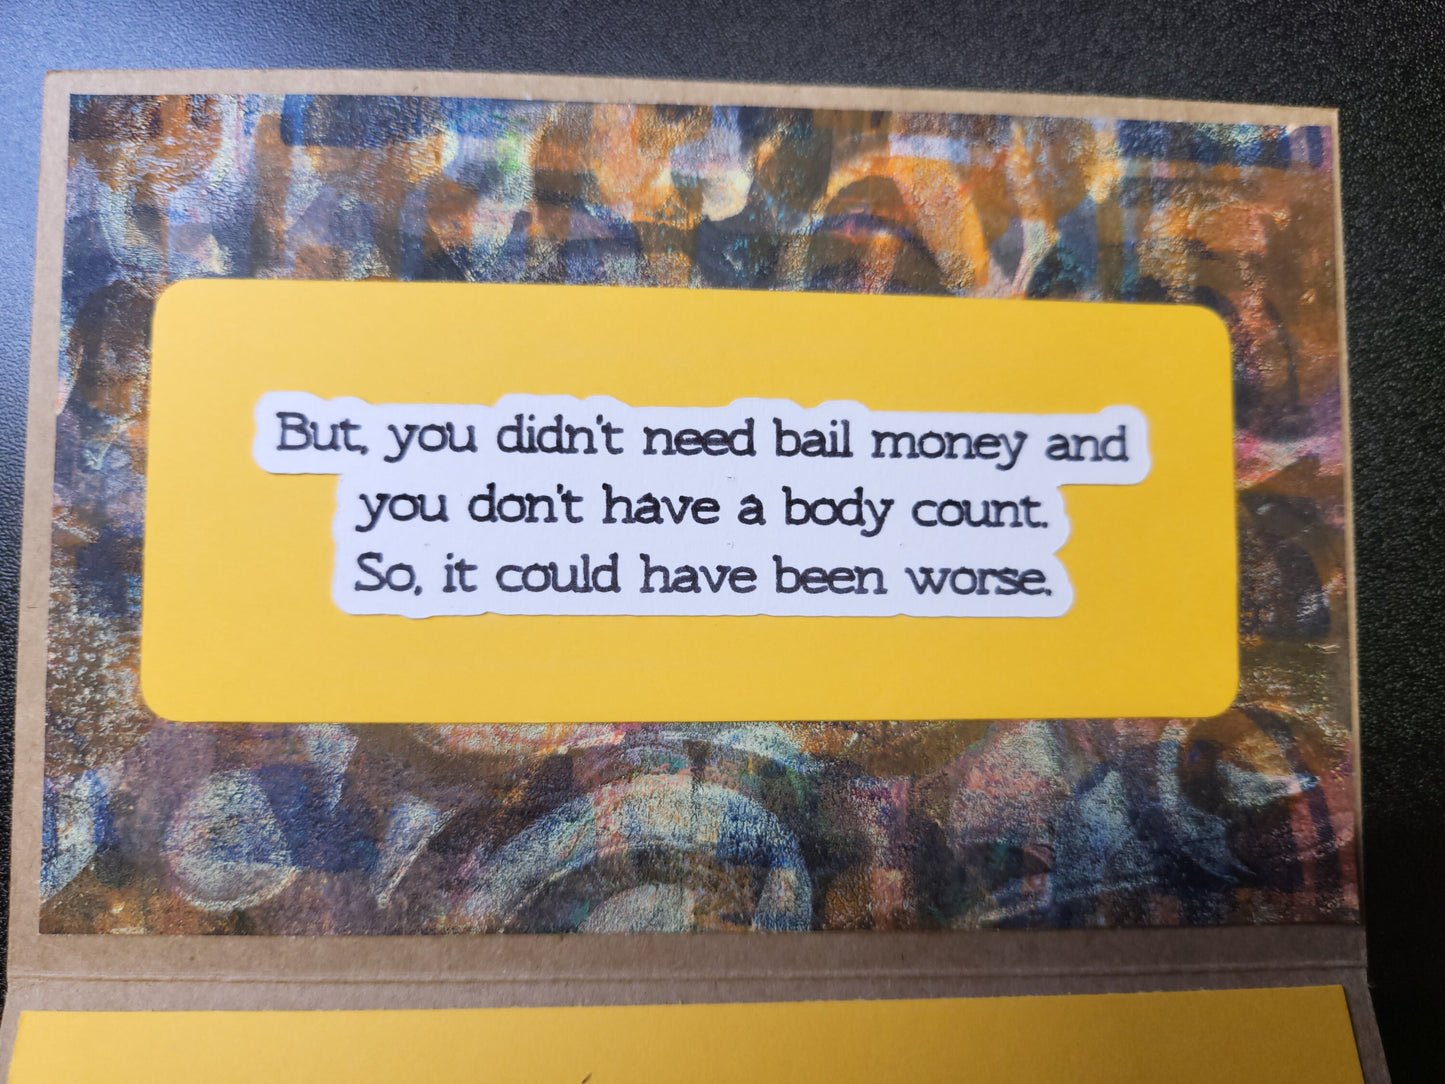 It's Been a Rough Week - But You Didn't Need Bail Money And There's No Body Count